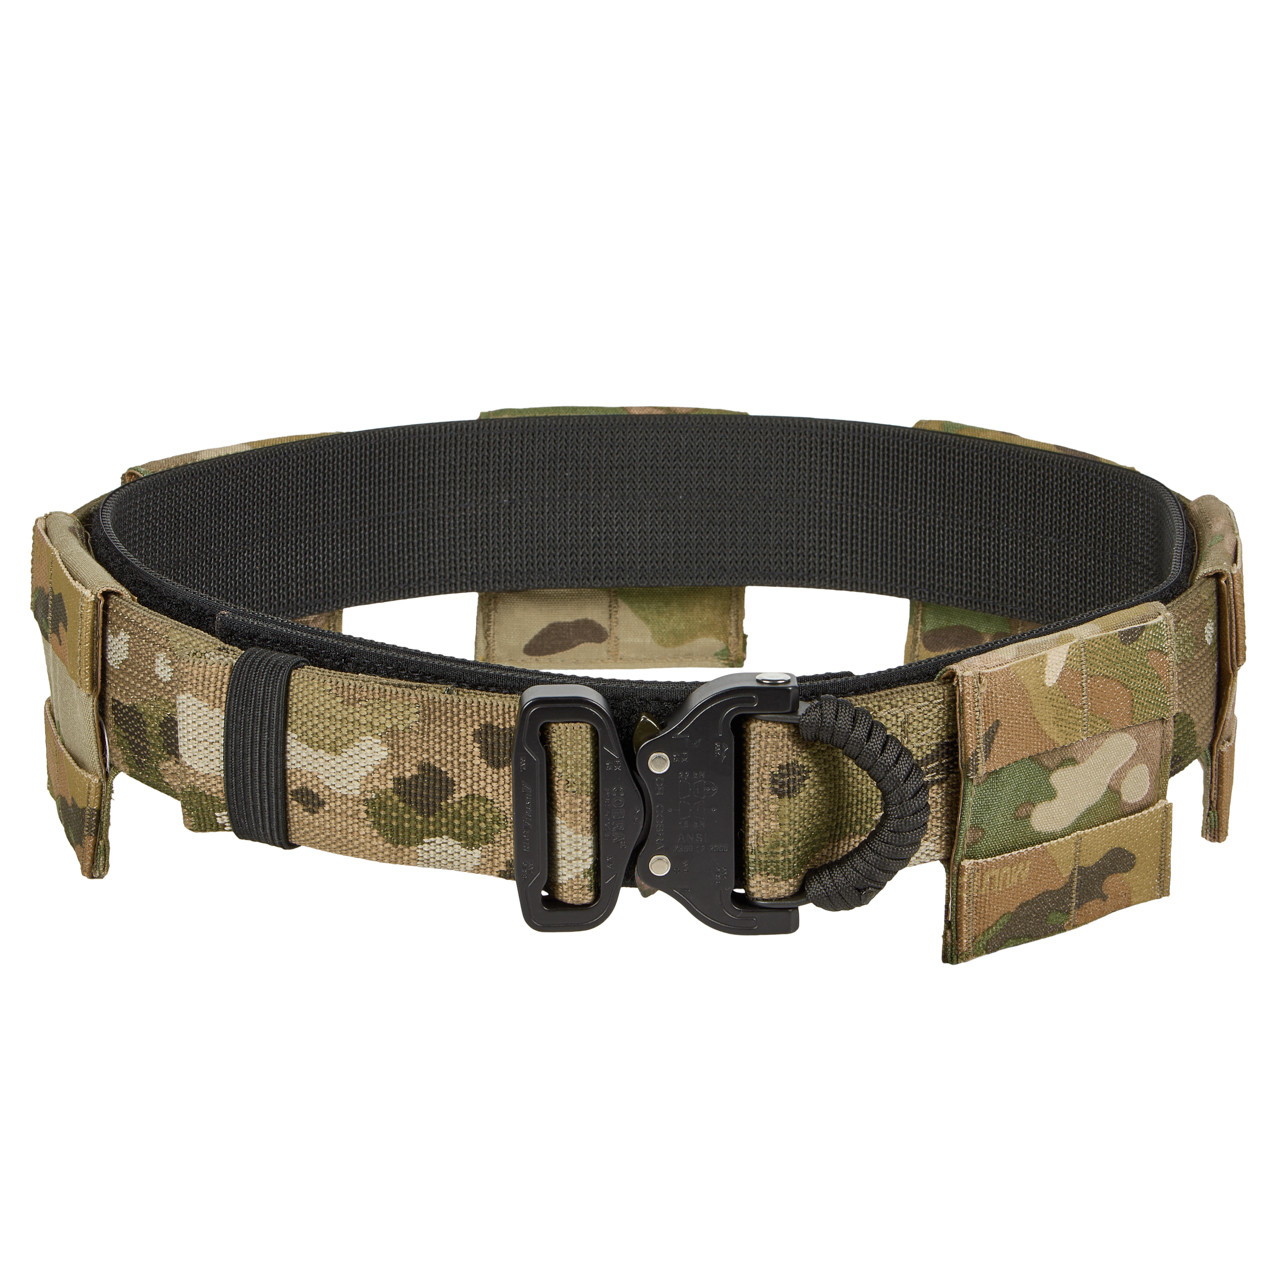 Tactical belt with molle panels